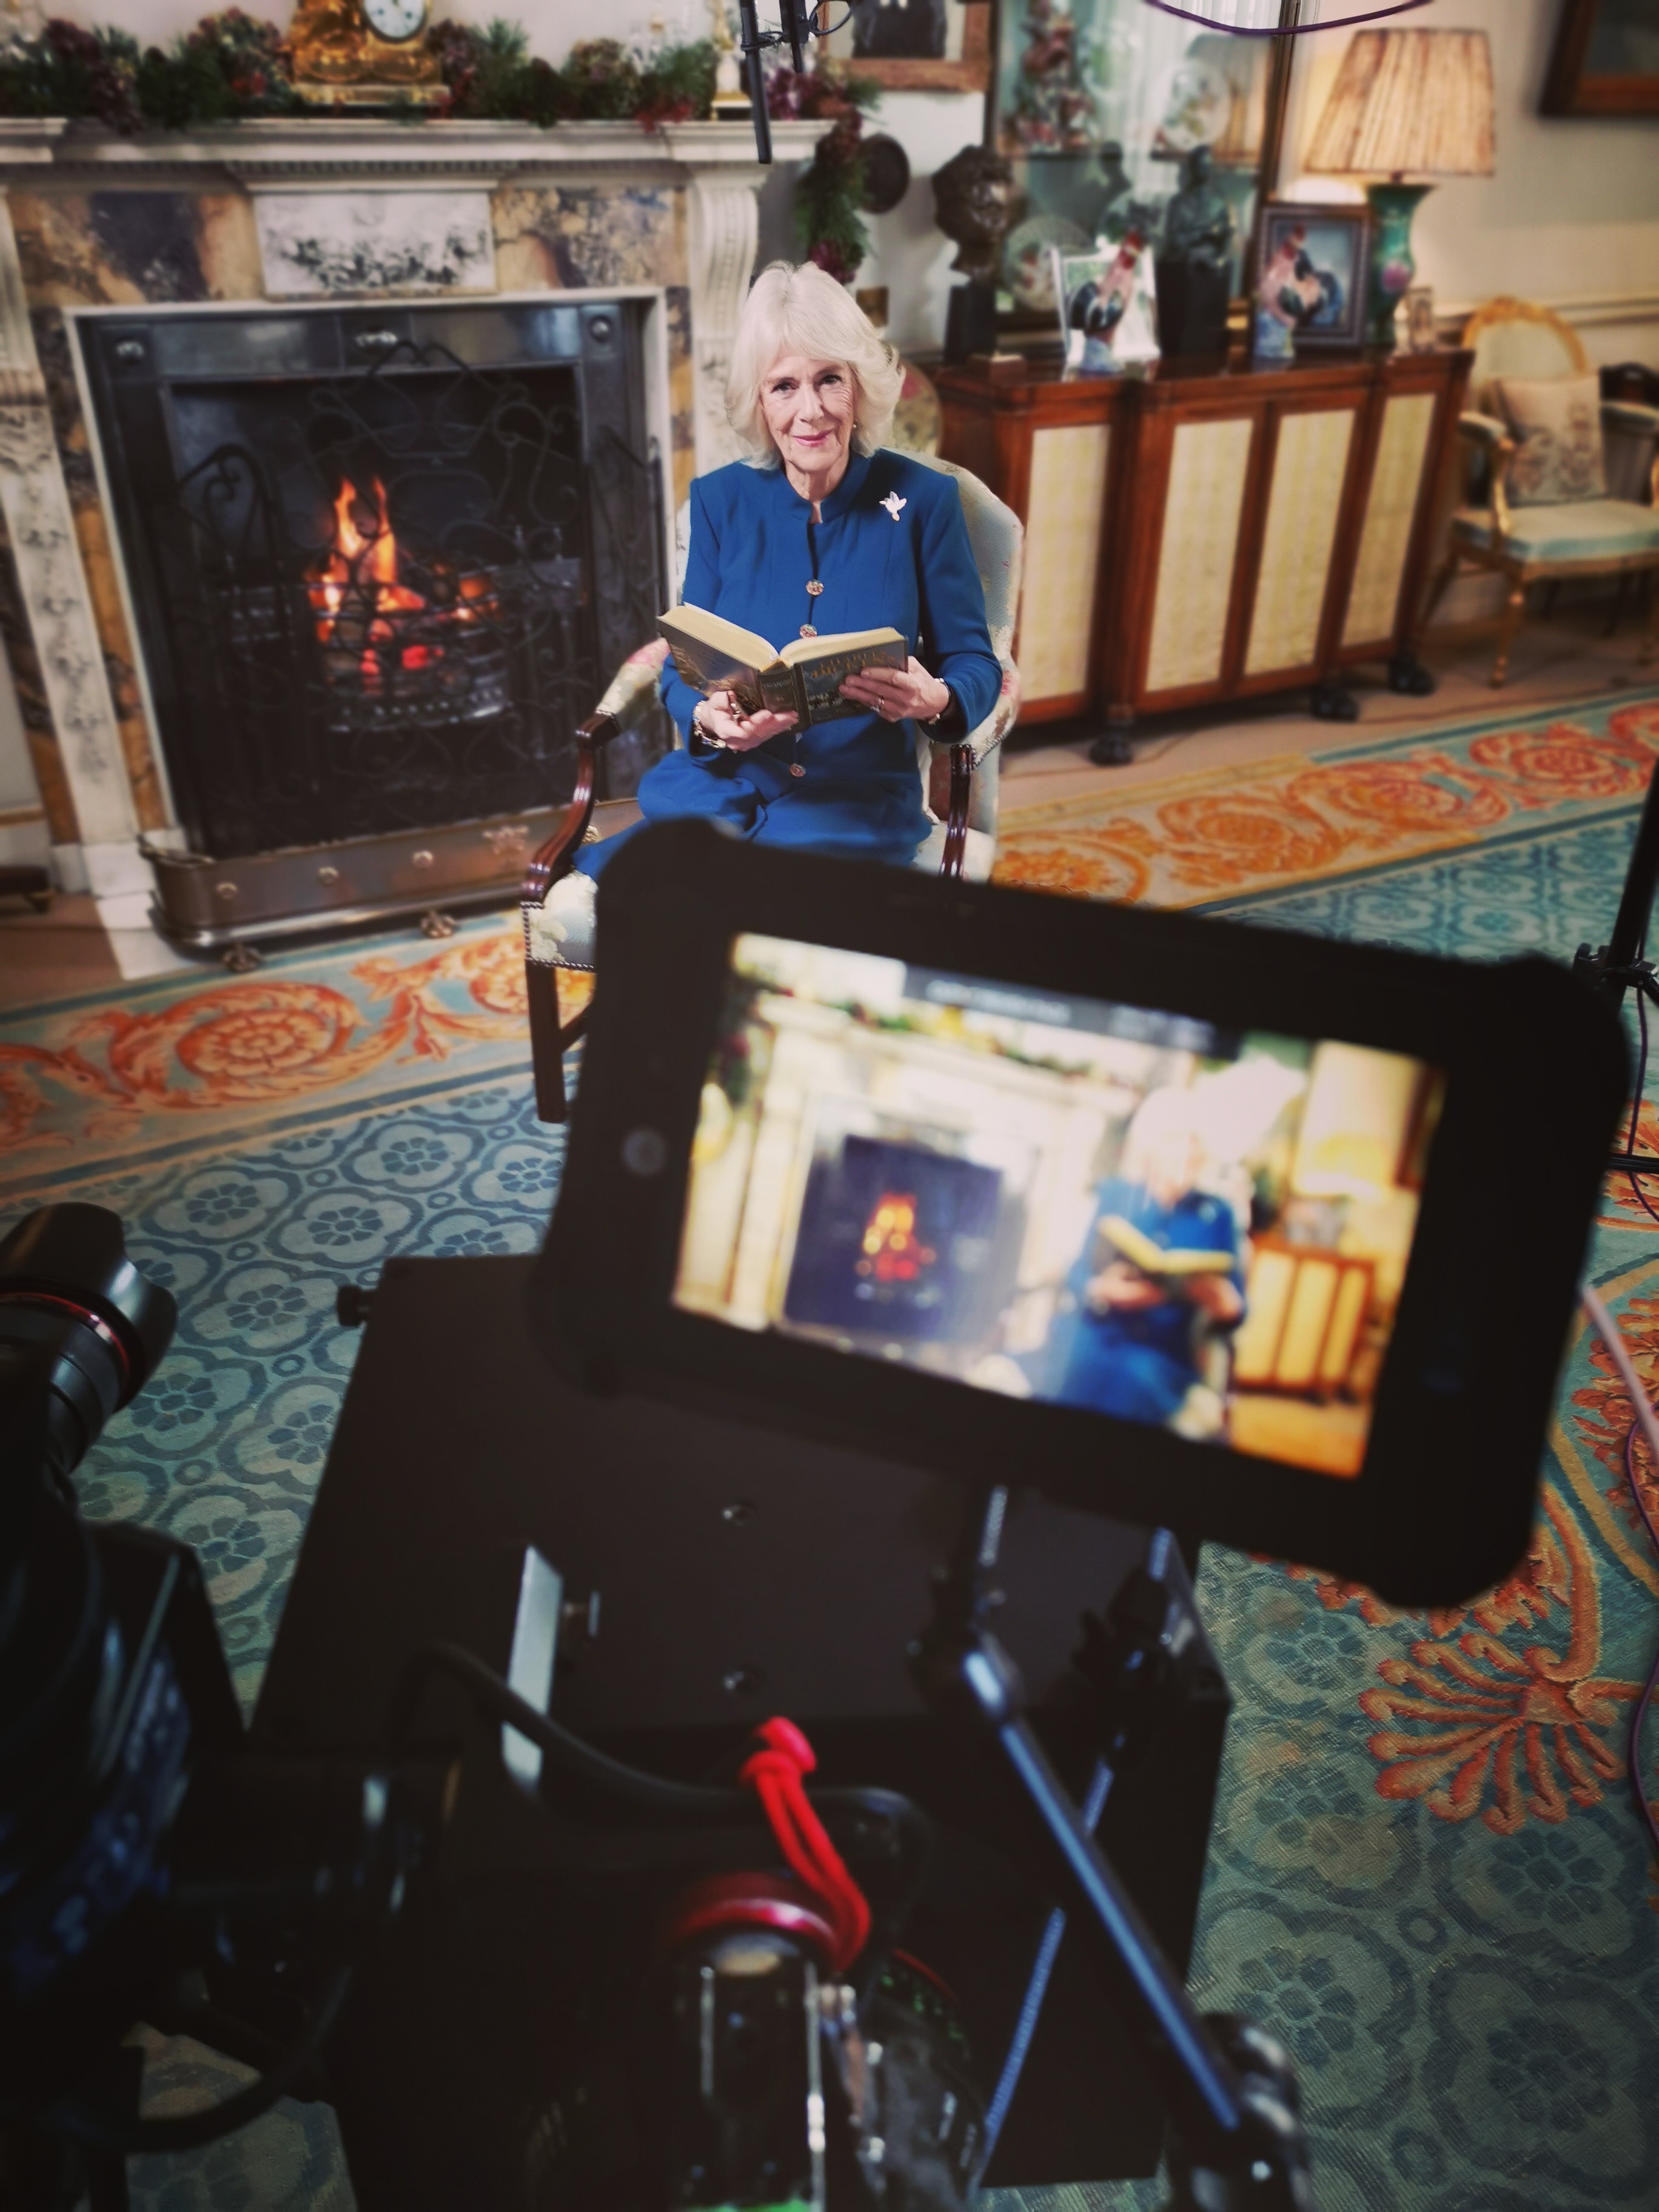 The Duchess of Cornwall reads from A Christmas Carol